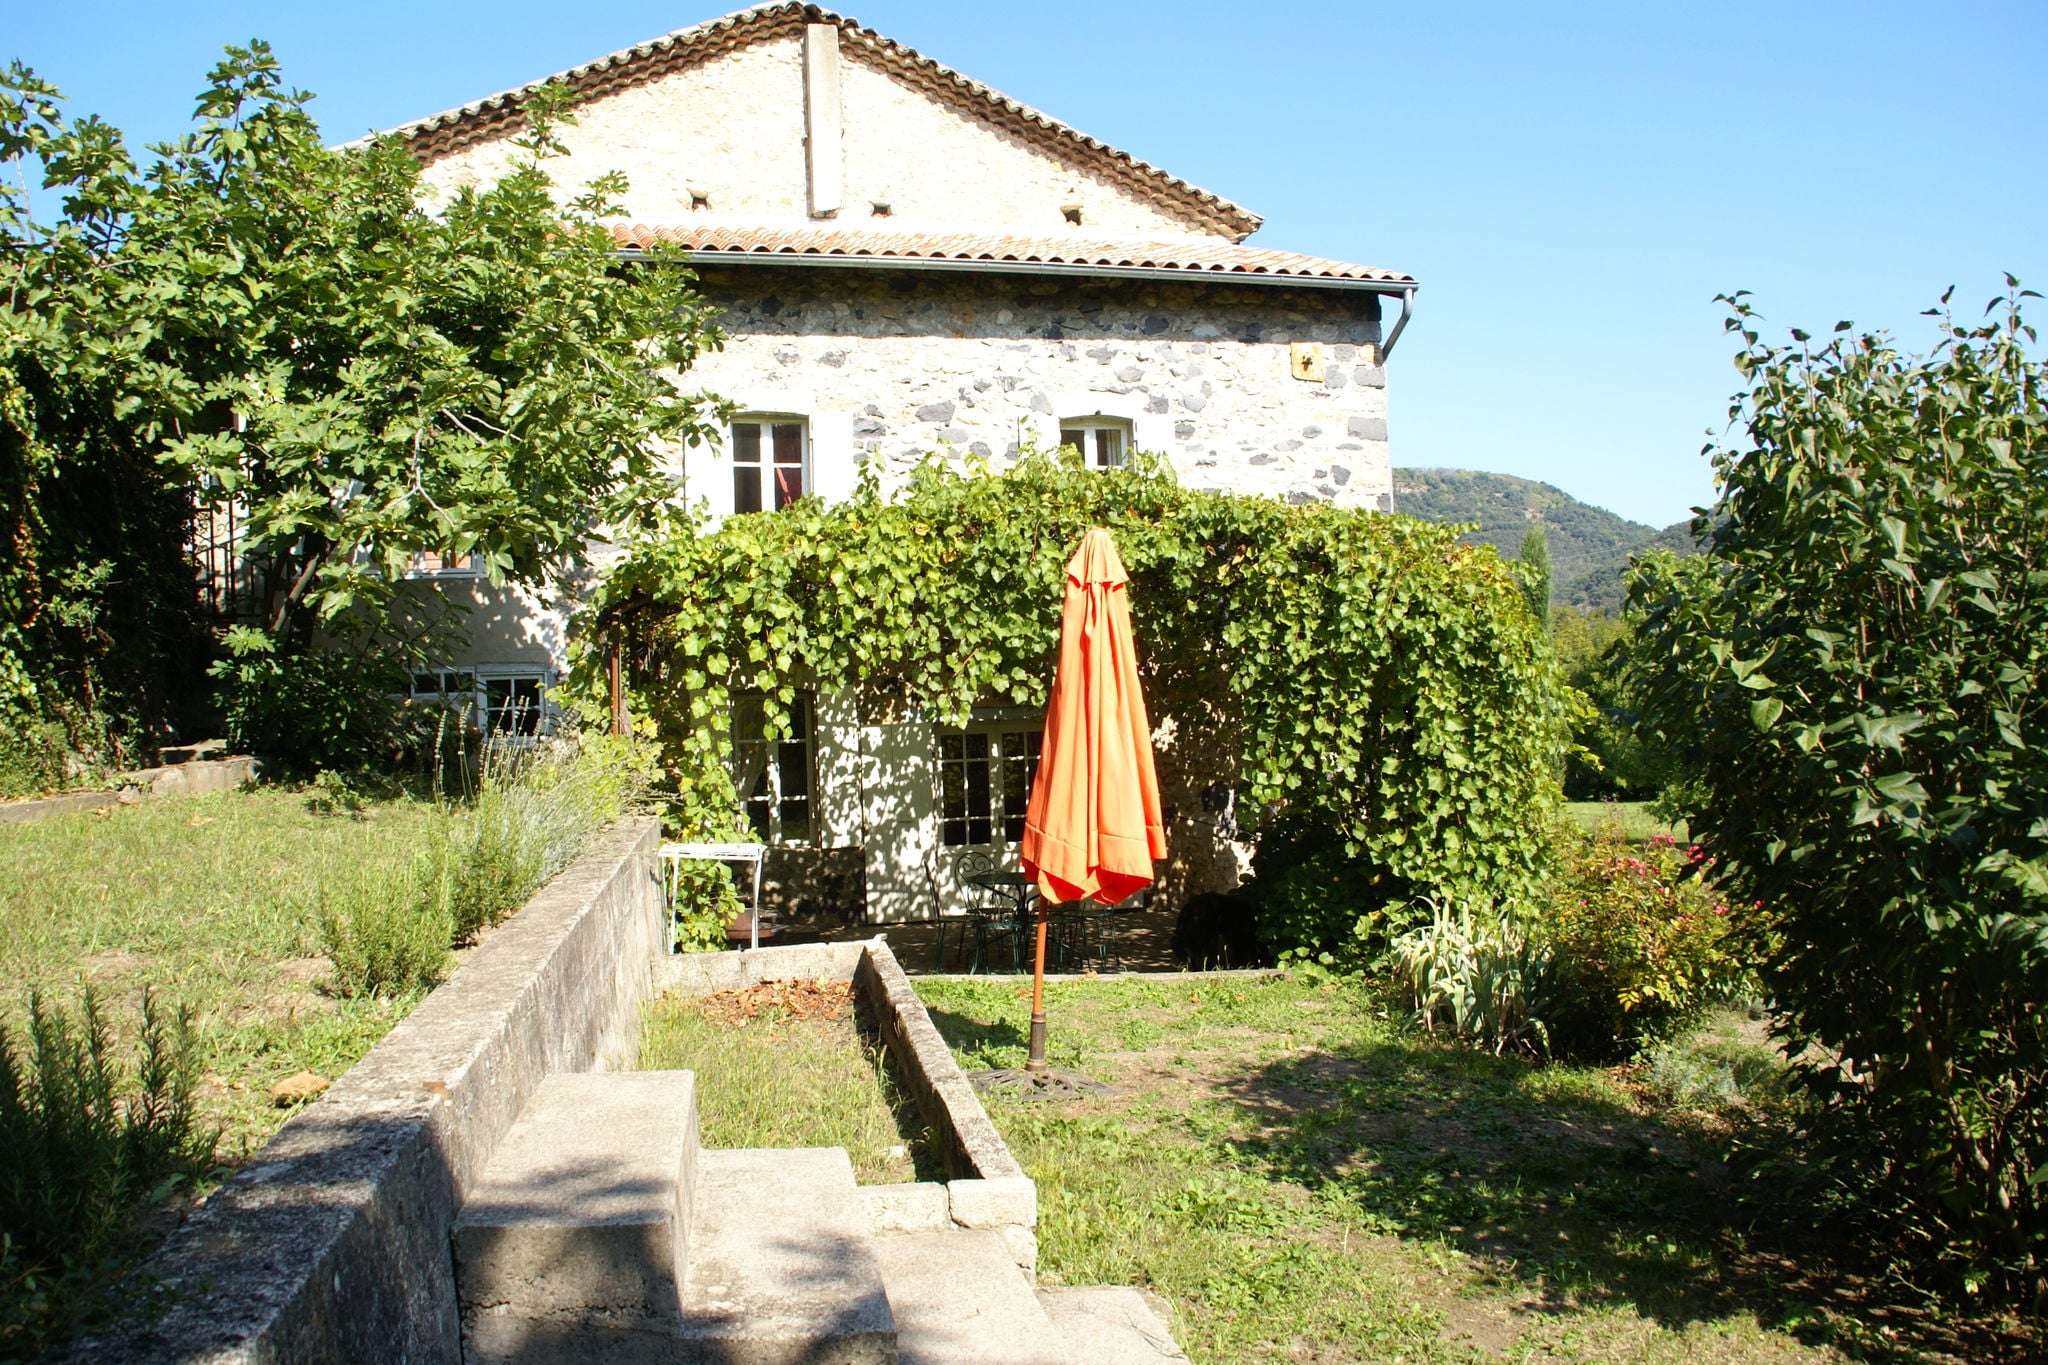 Lovely house with grass garden, shared swimmingpool, next to the river Ardèche